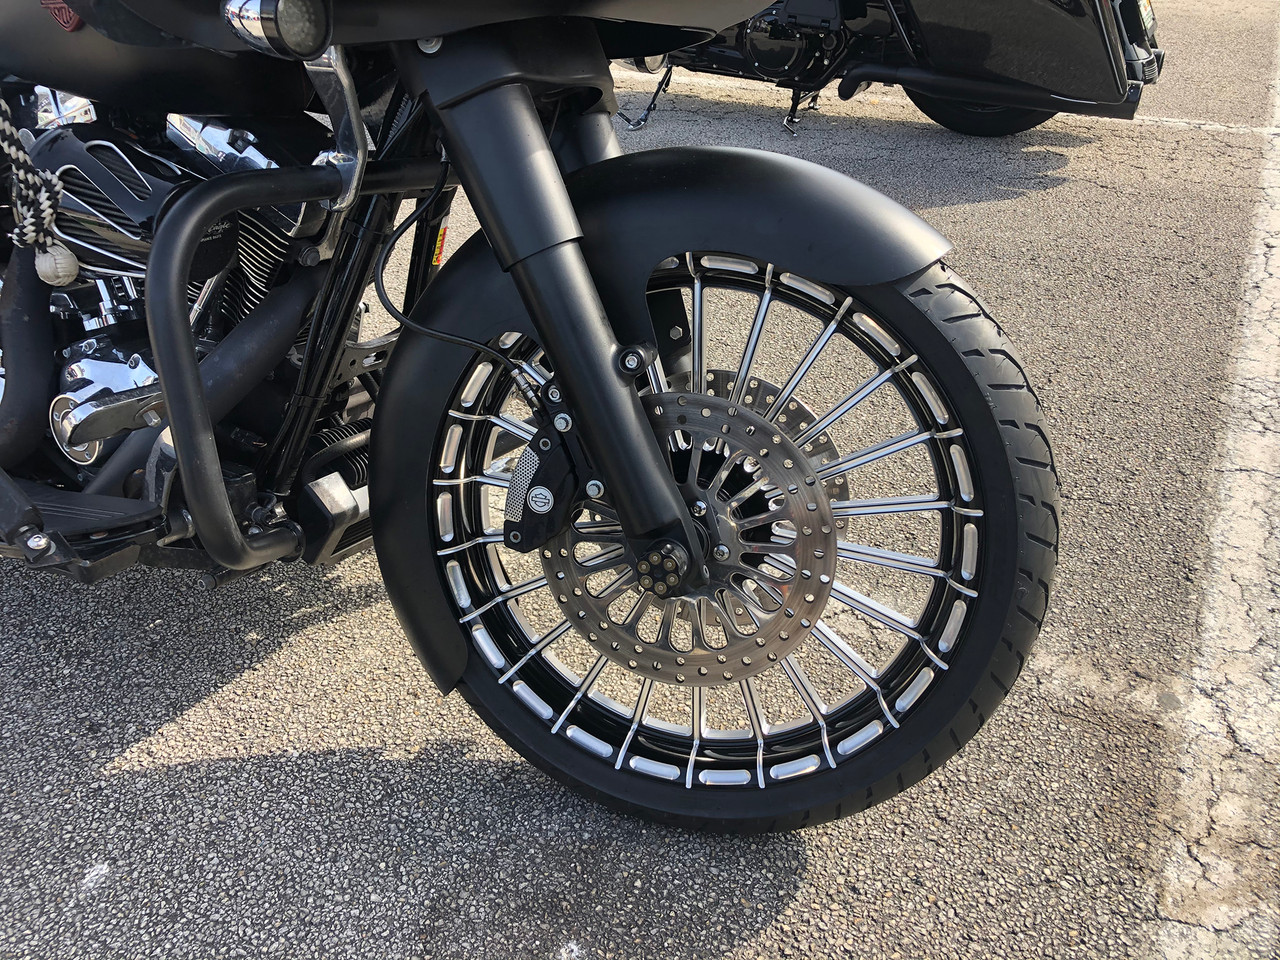 FTD Customs Harley Davidson 23 inch Fat Front Wheel Capone